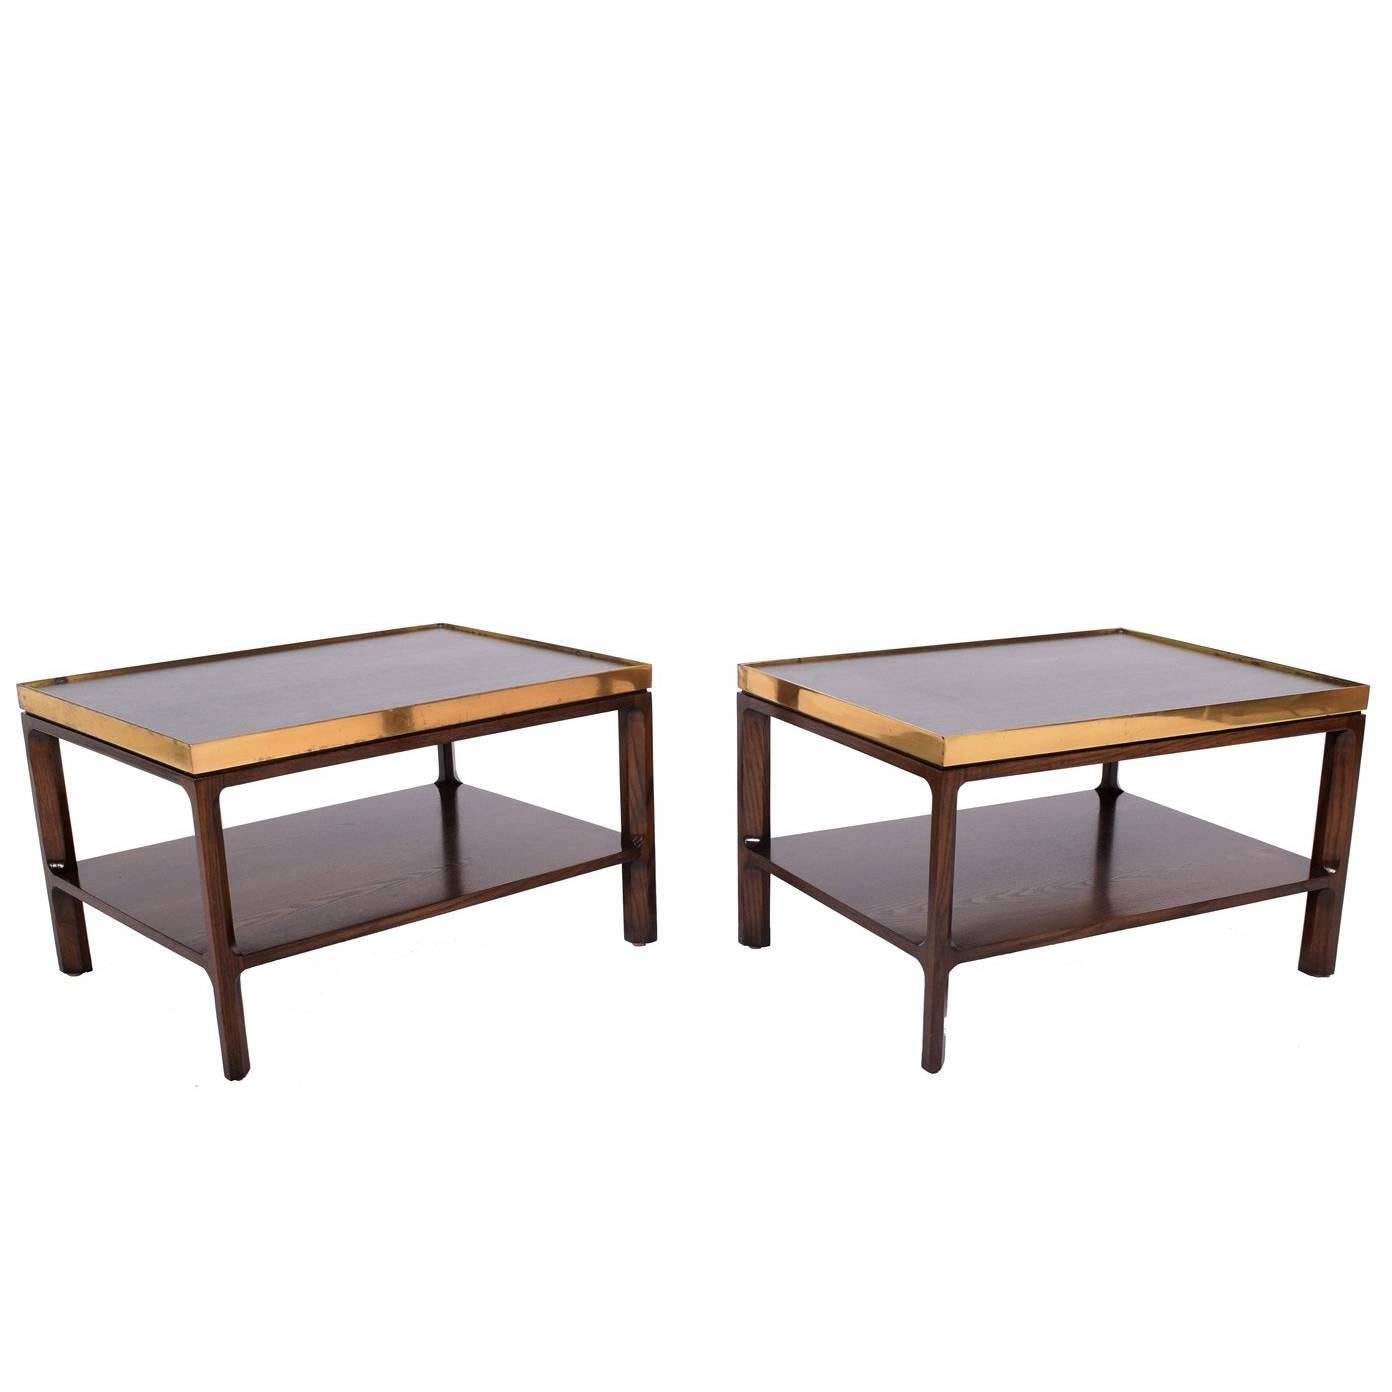 Pair of Side Tables by Edward Wormley for Dunbar